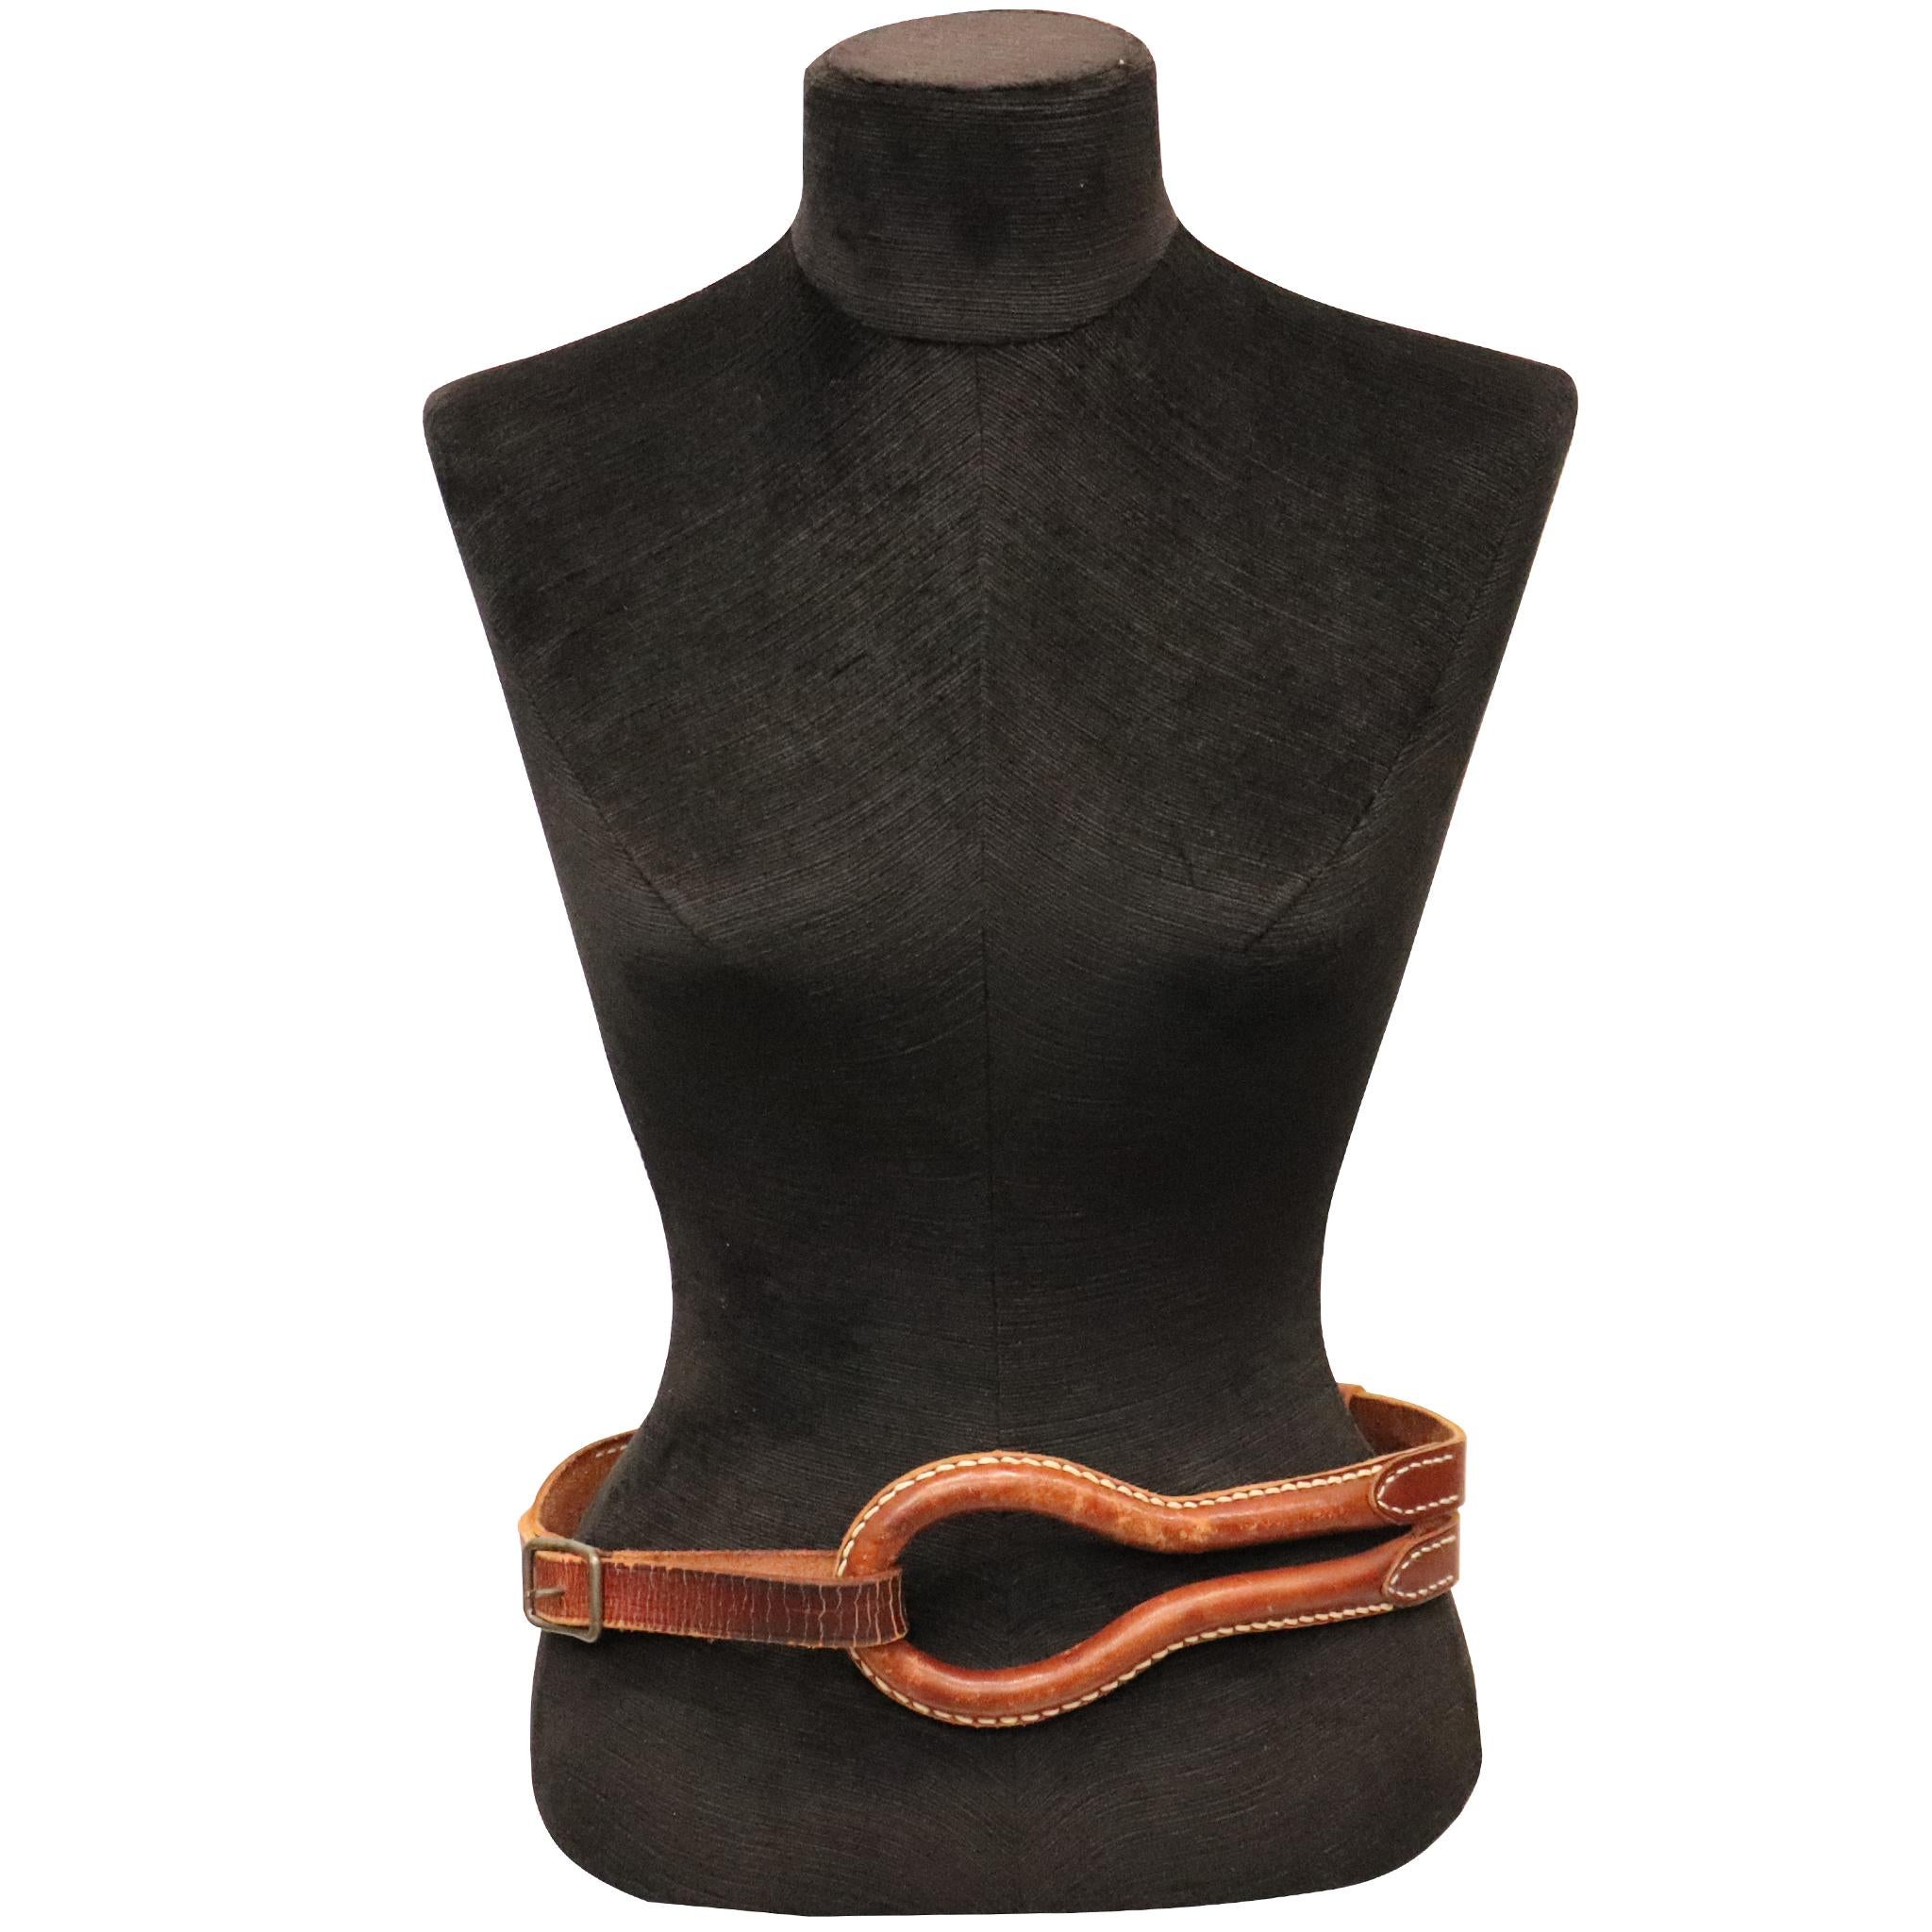 Plantation brown leather double band W/ Loop and Front Buckle. In excellent condition 

Measurements: 

Longest length - 39.5 inches
Shortest length - 33 inches
Width - 1.9 inches